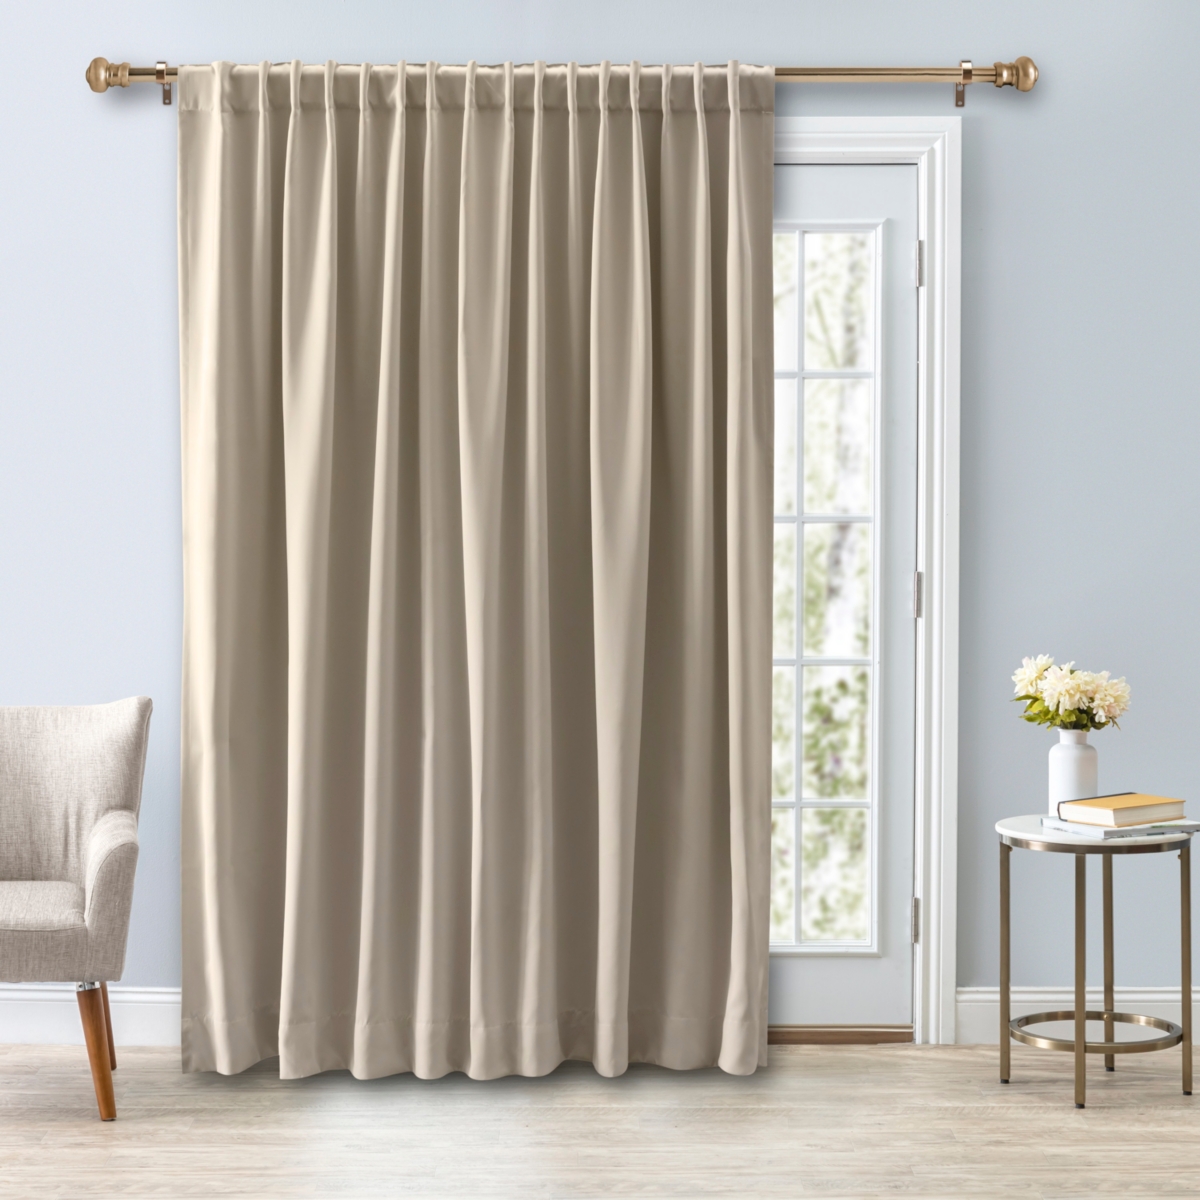 Ultimate Black-Out 2-Way Pocket Double-wide Curtain Panel 112"W x 84"L - Ivory